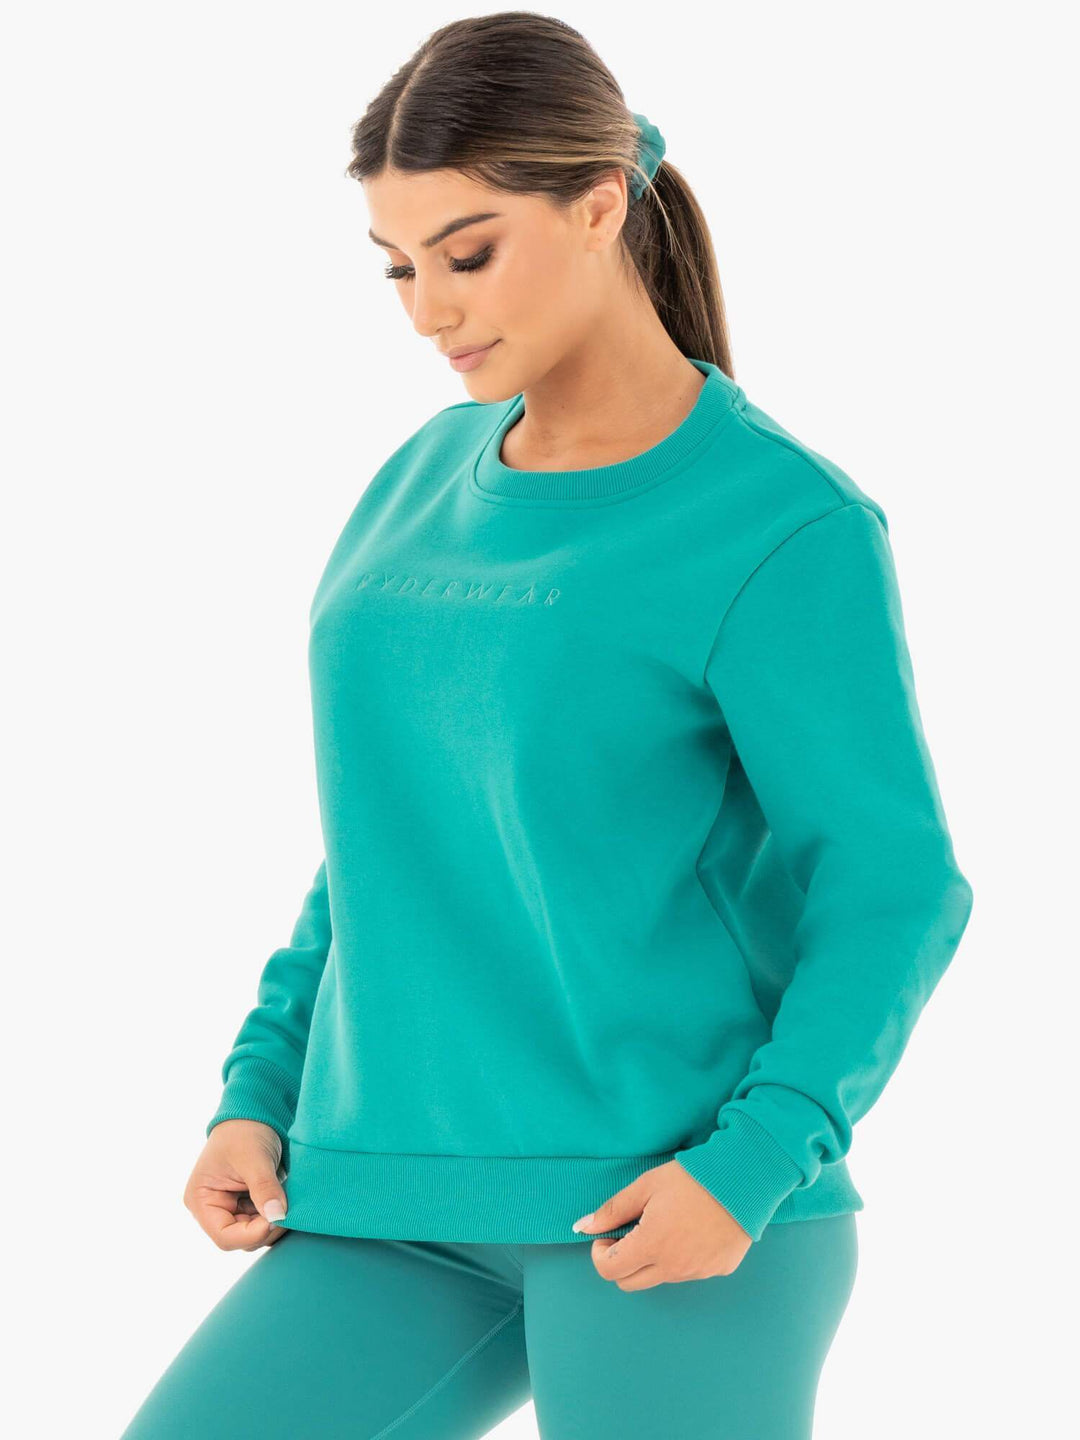 Motion Oversized Sweater - Teal Clothing Ryderwear 